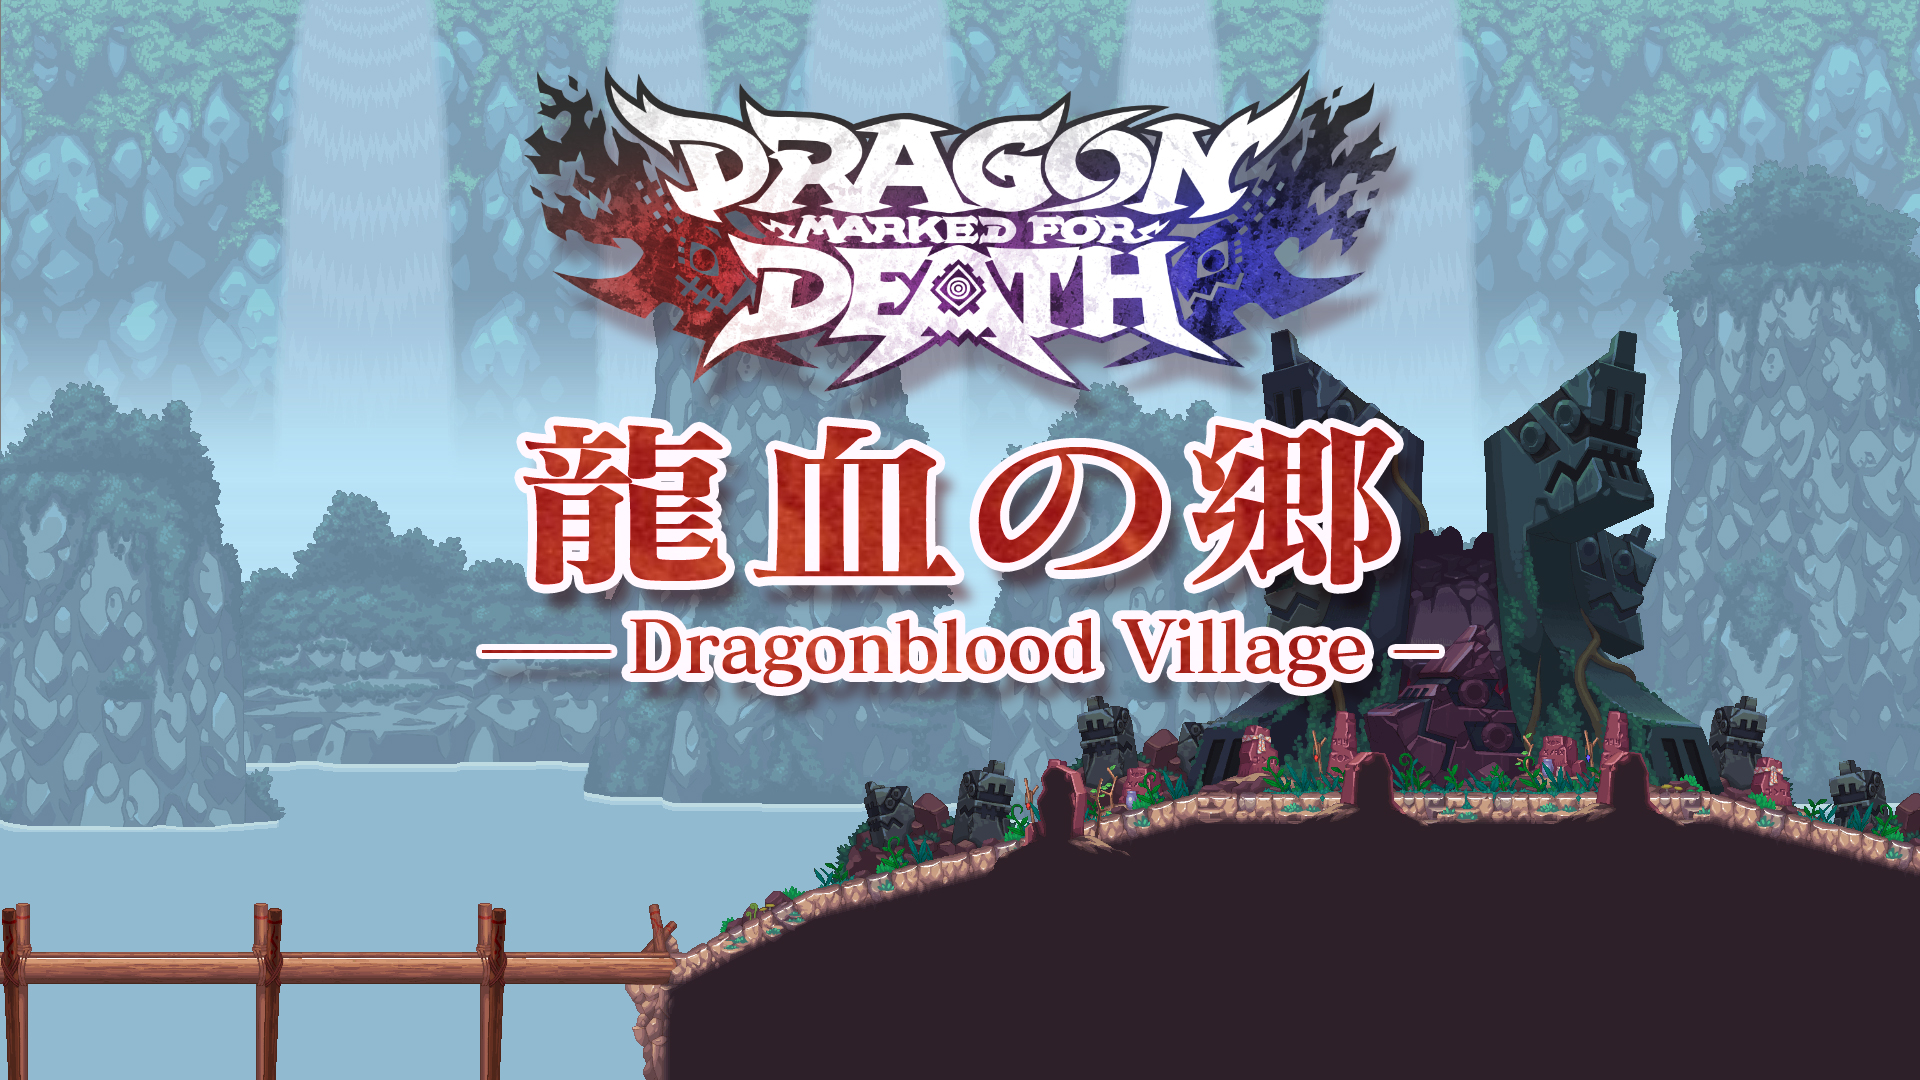 Additional Quest: The Dragonblood Village